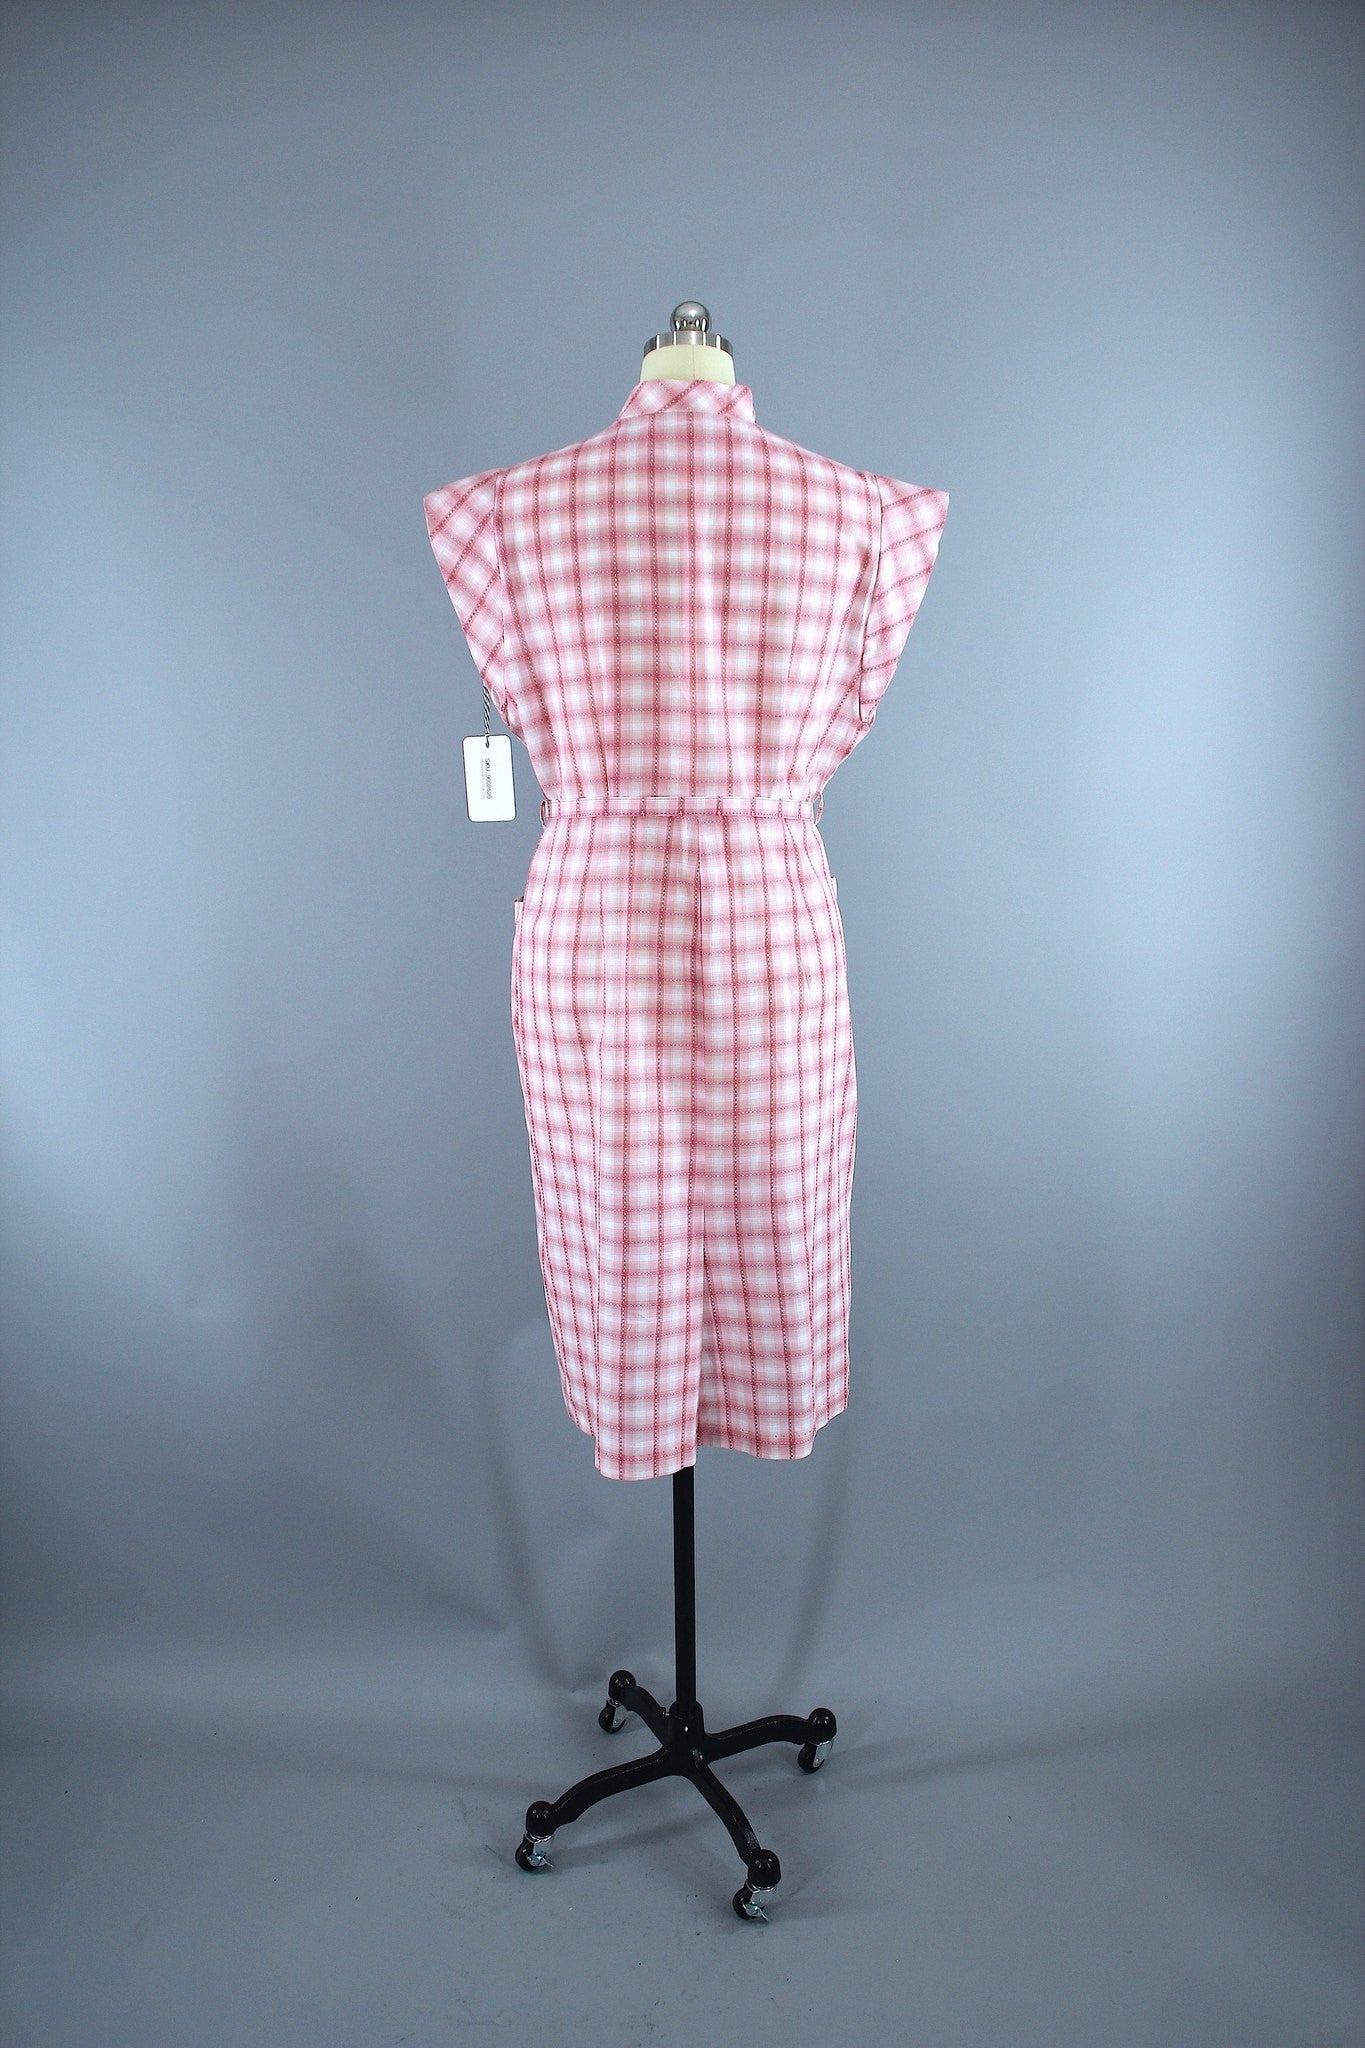 Vintage 1950s New Look Day Dress / Pink & White Checkerboard Plaid Cotton - ThisBlueBird